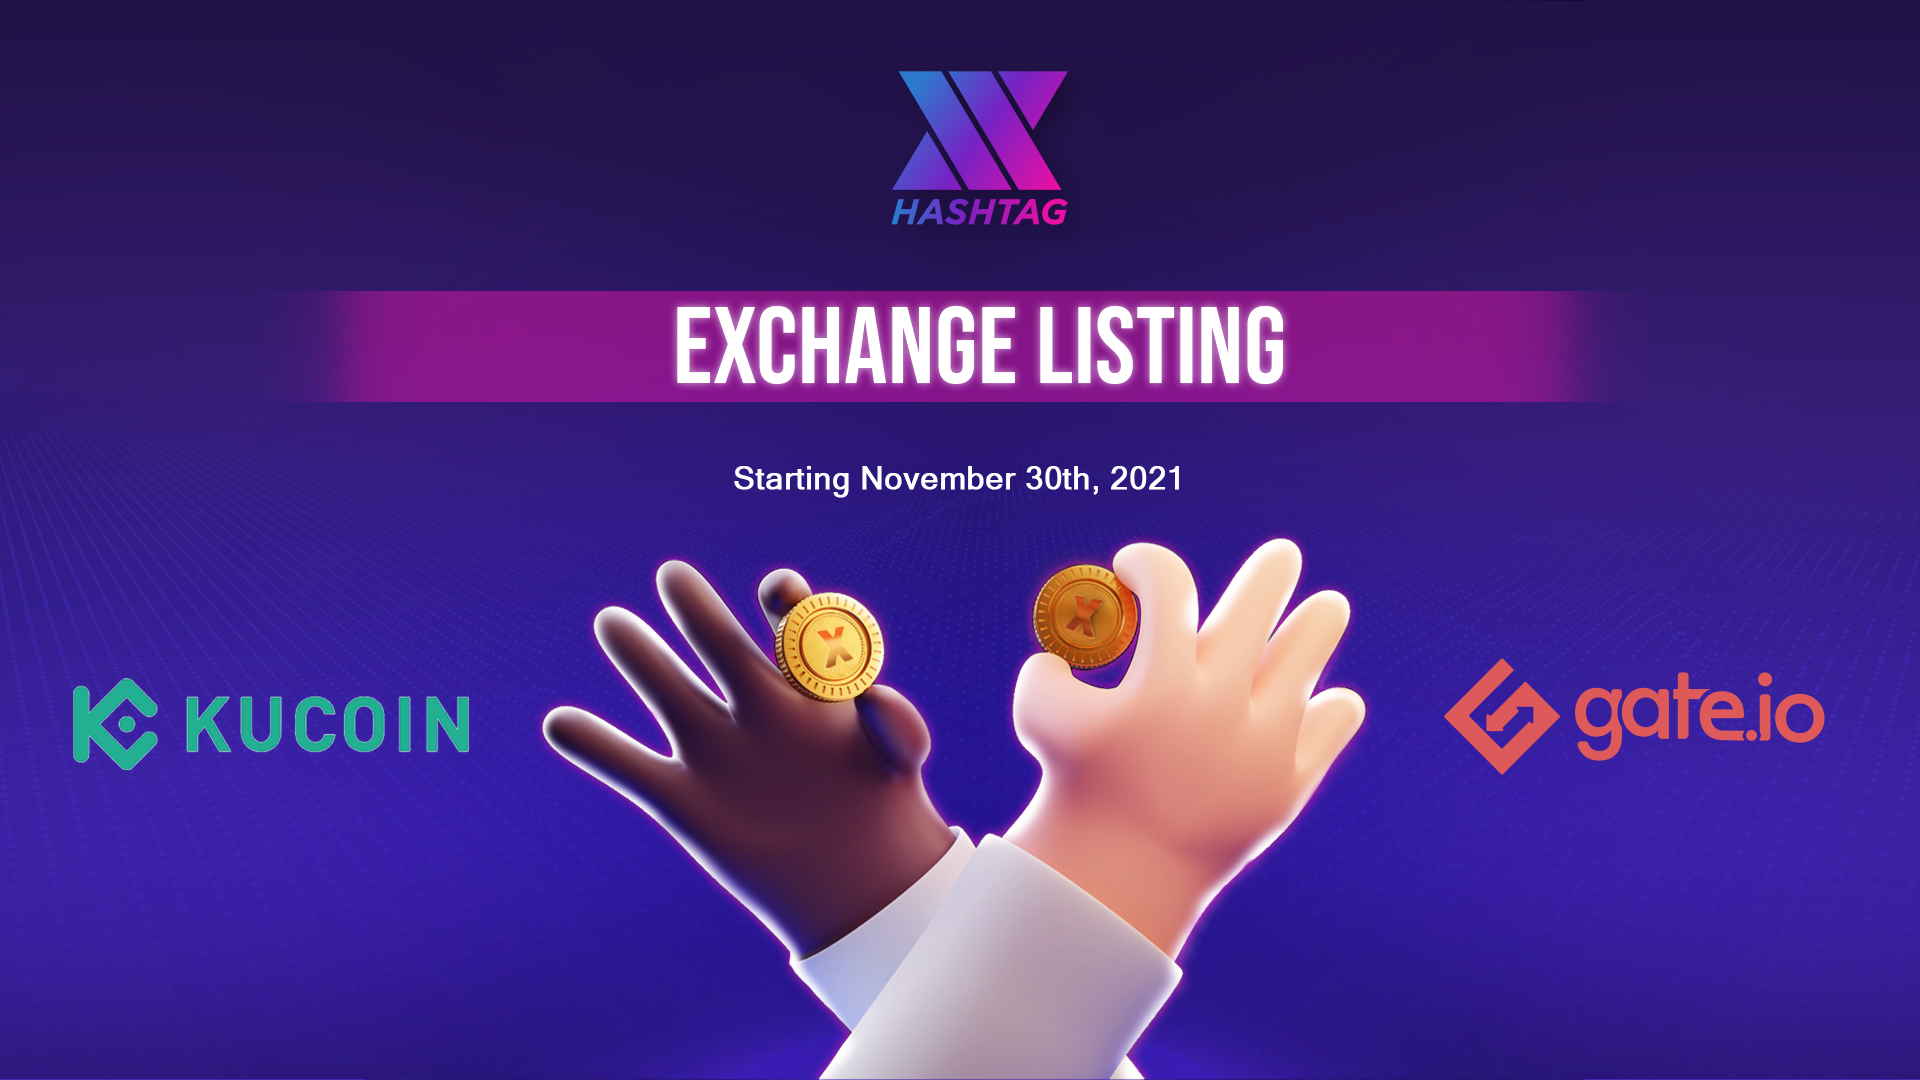 xHashtag Token ($XTAG) Gets Listed on KuCoin and Gate.io 1